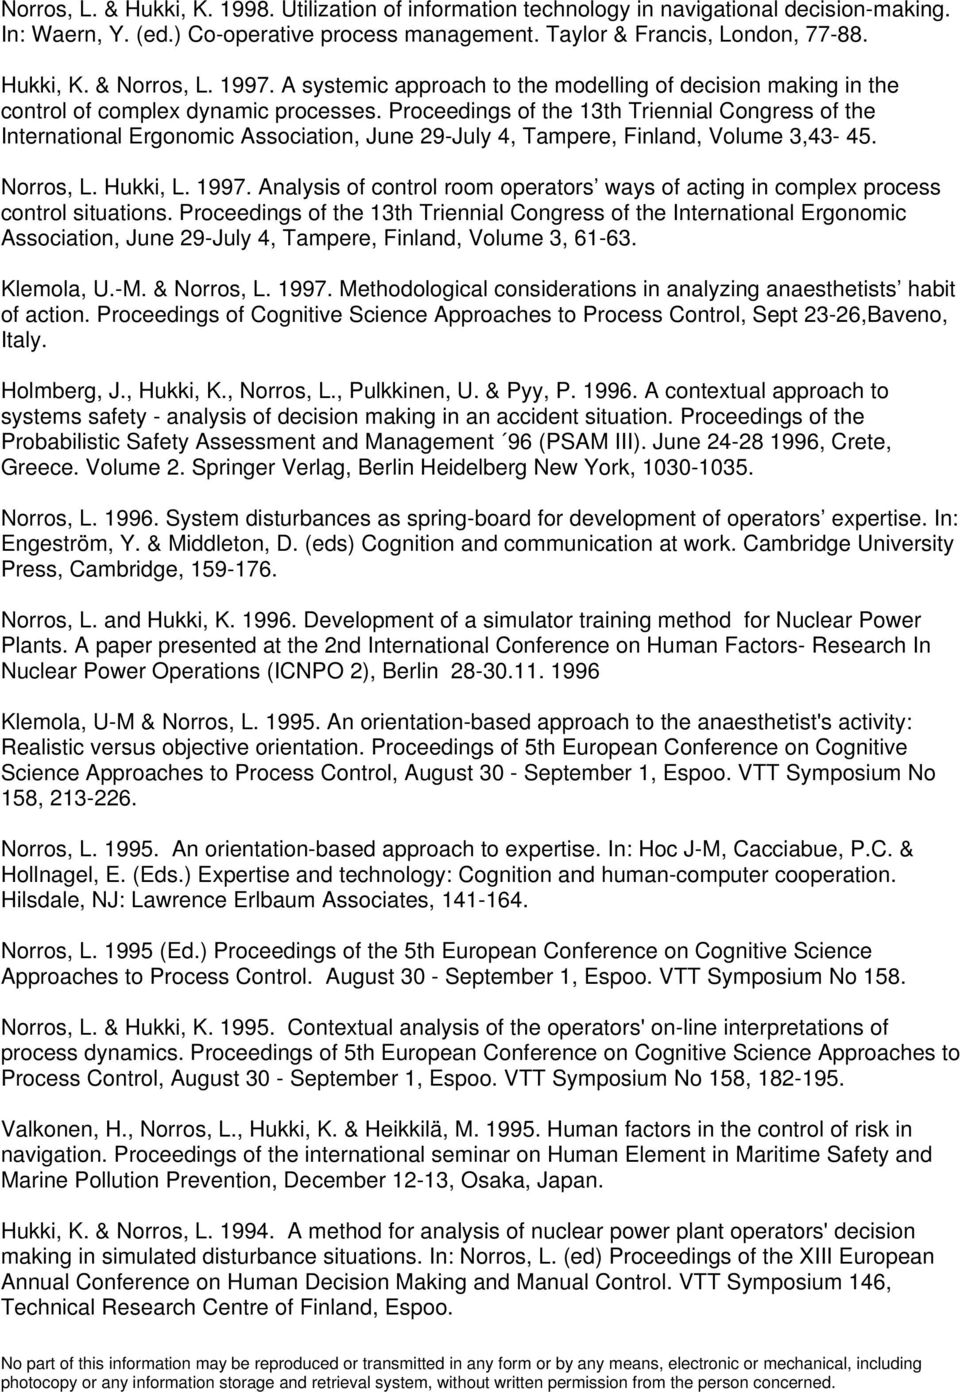 Proceedings of the 13th Triennial Congress of the International Ergonomic Association, June 29-July 4, Tampere, Finland, Volume 3,43-45. Norros, L. Hukki, L. 1997.